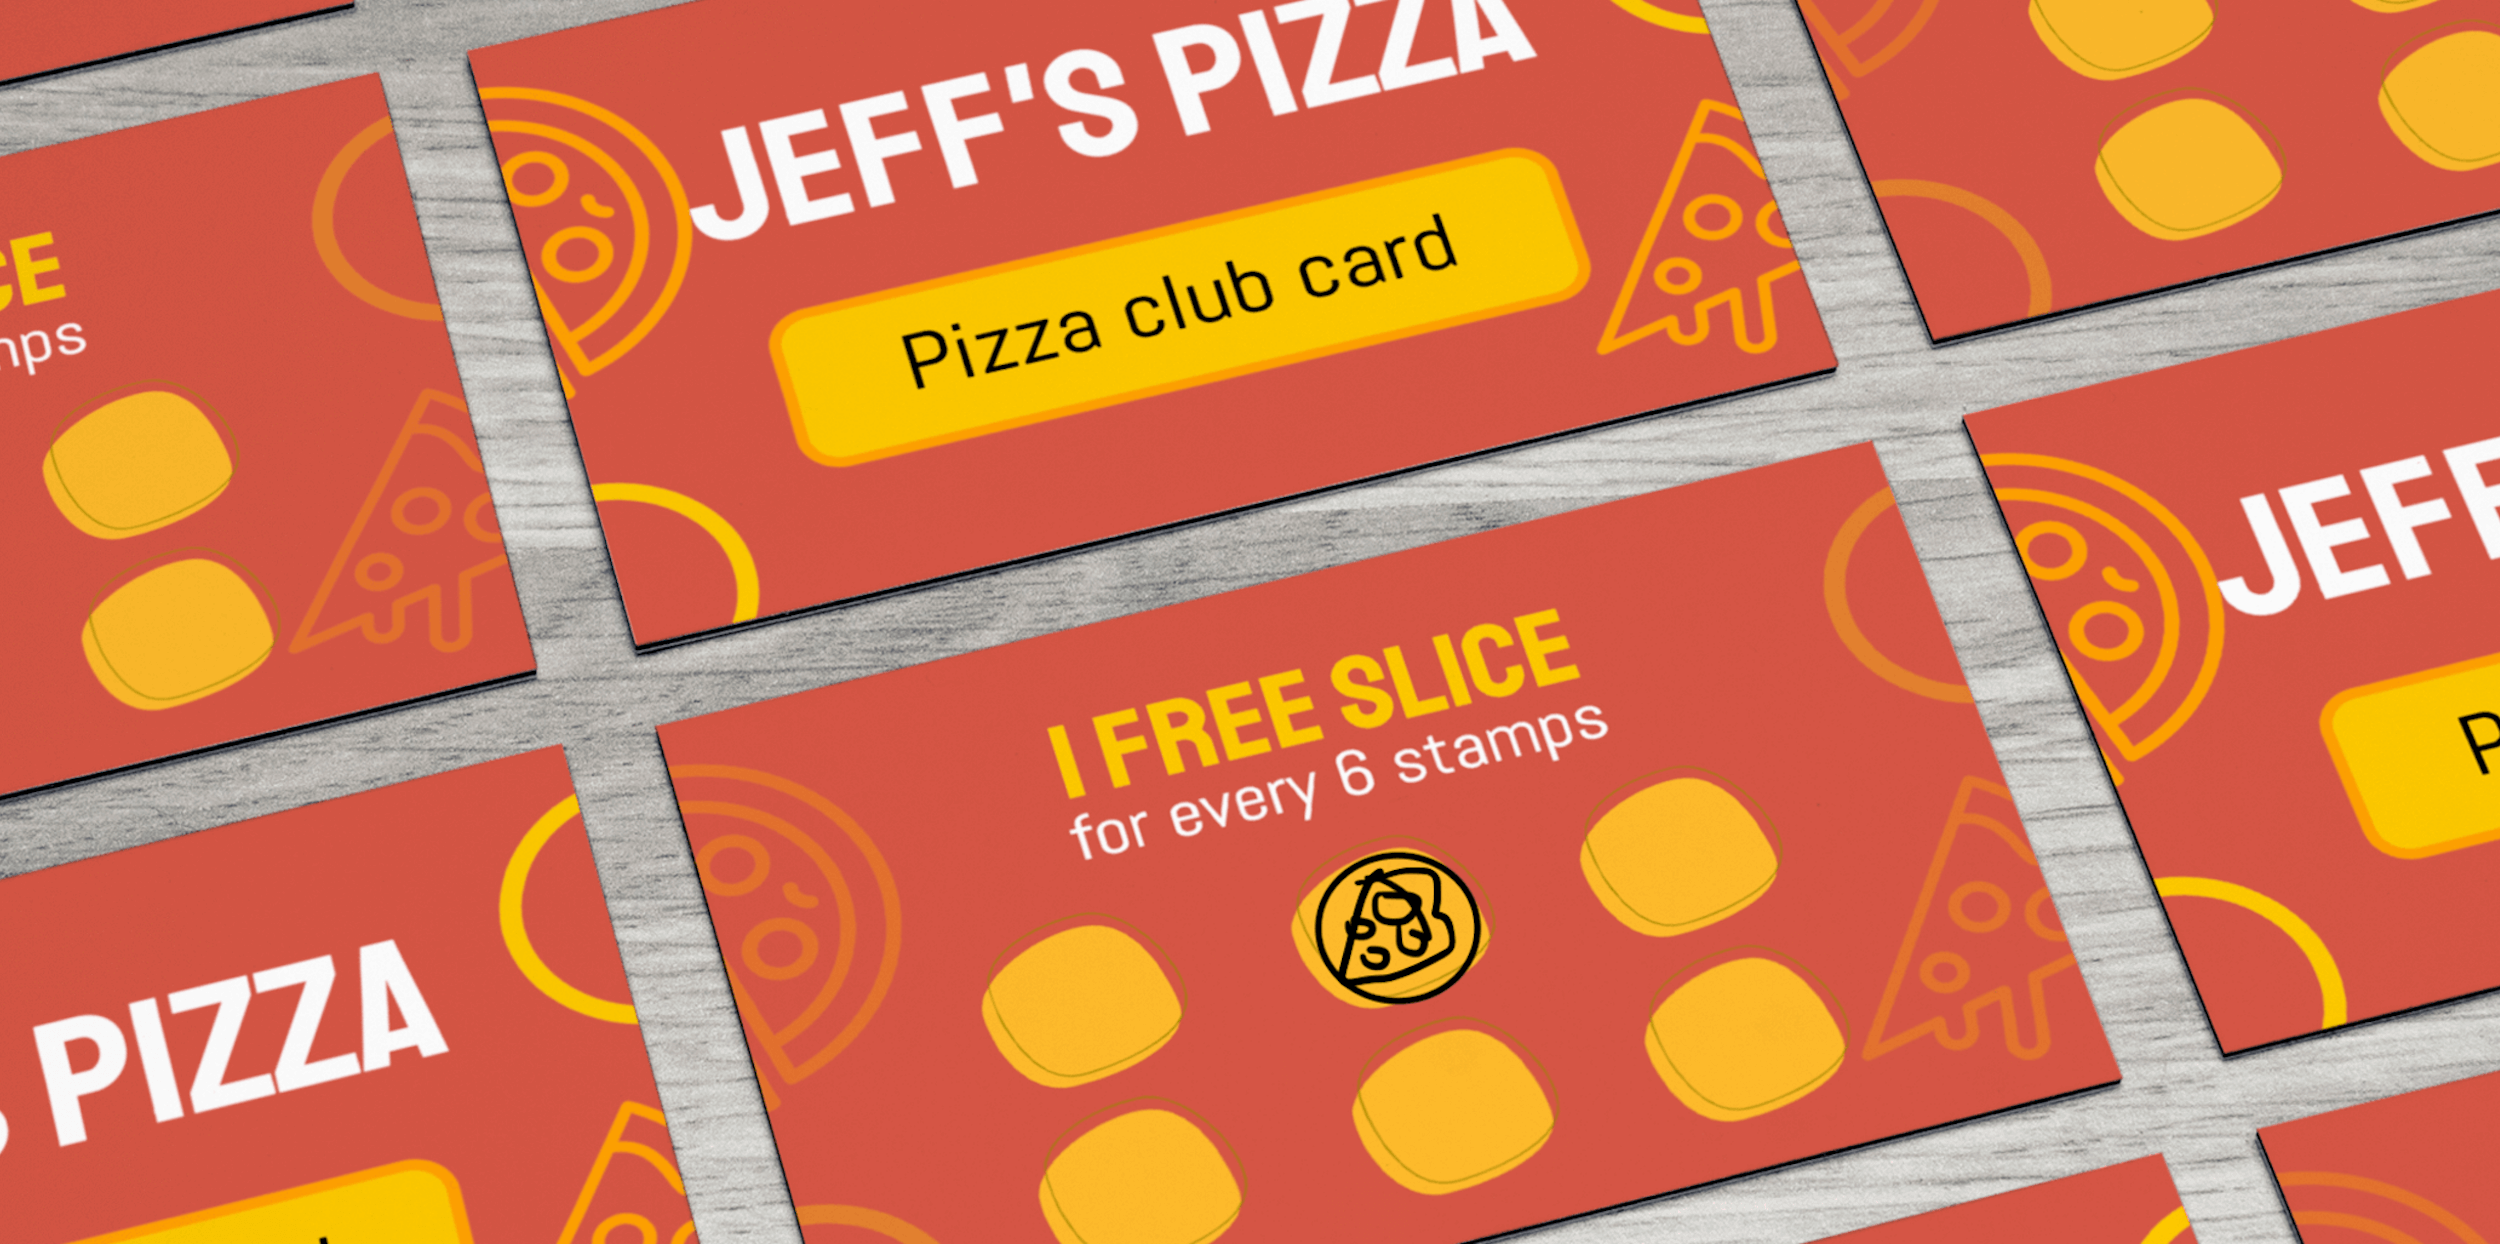 Rows of red-and-yellow stamp cards for "Jeff's Pizza" with one stamp completed